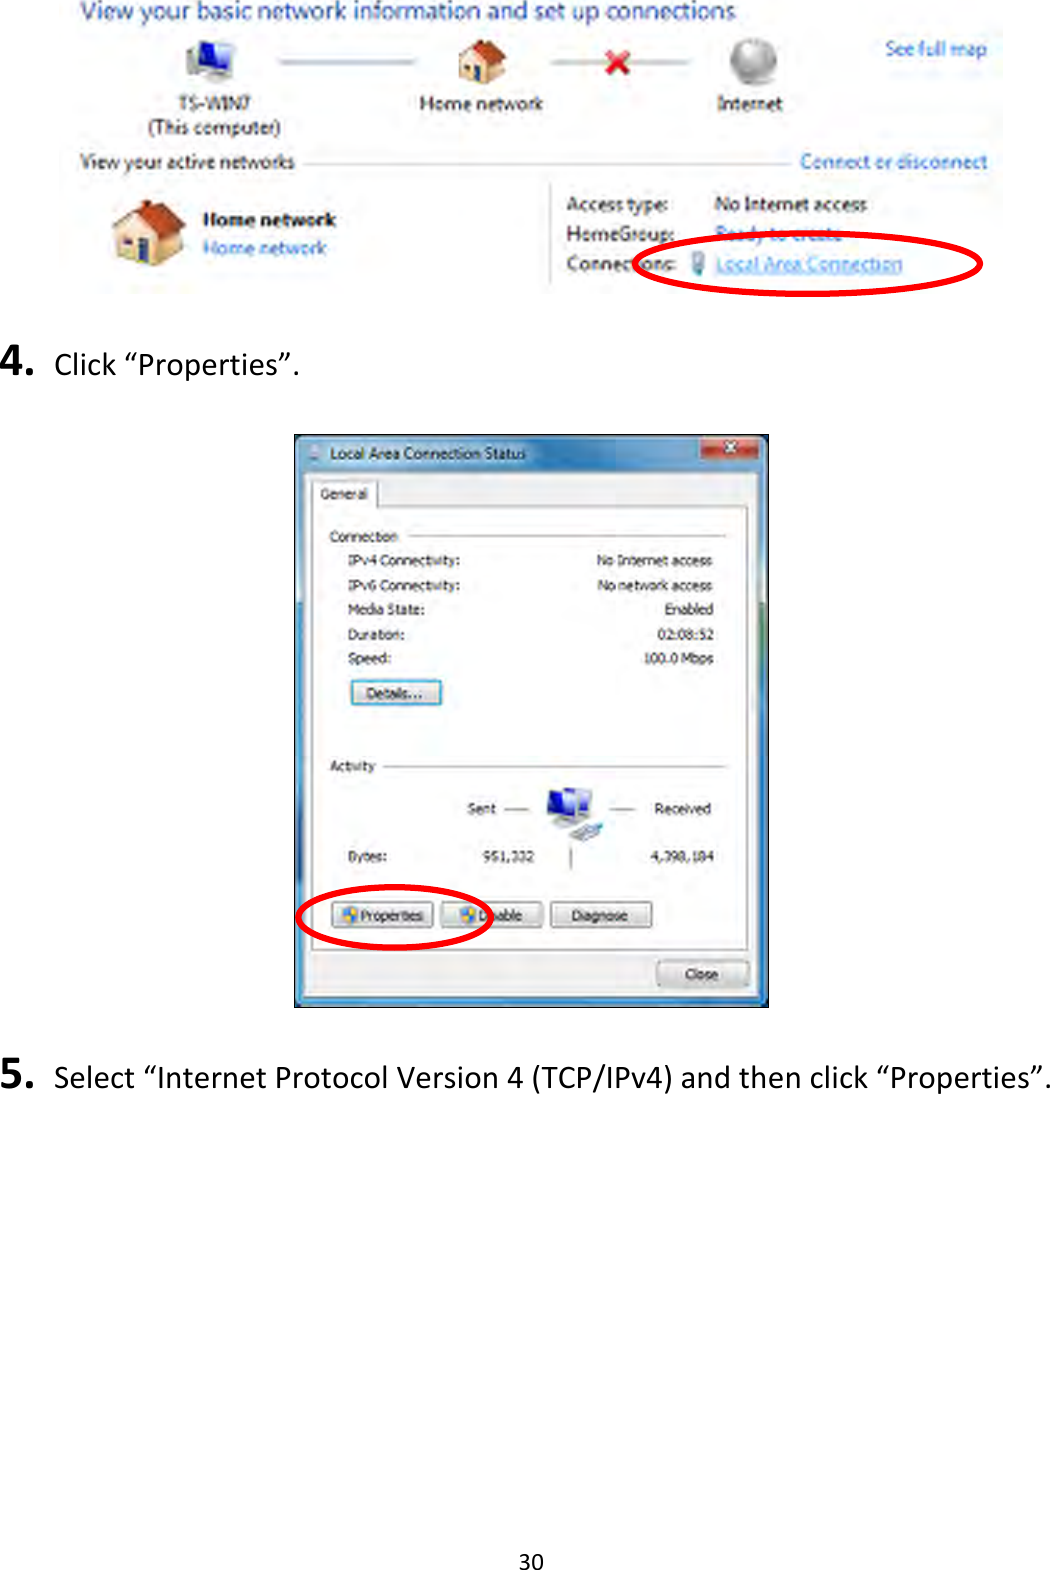 30   4.  Click “Properties”.    5.  Select “Internet Protocol Version 4 (TCP/IPv4) and then click “Properties”.  